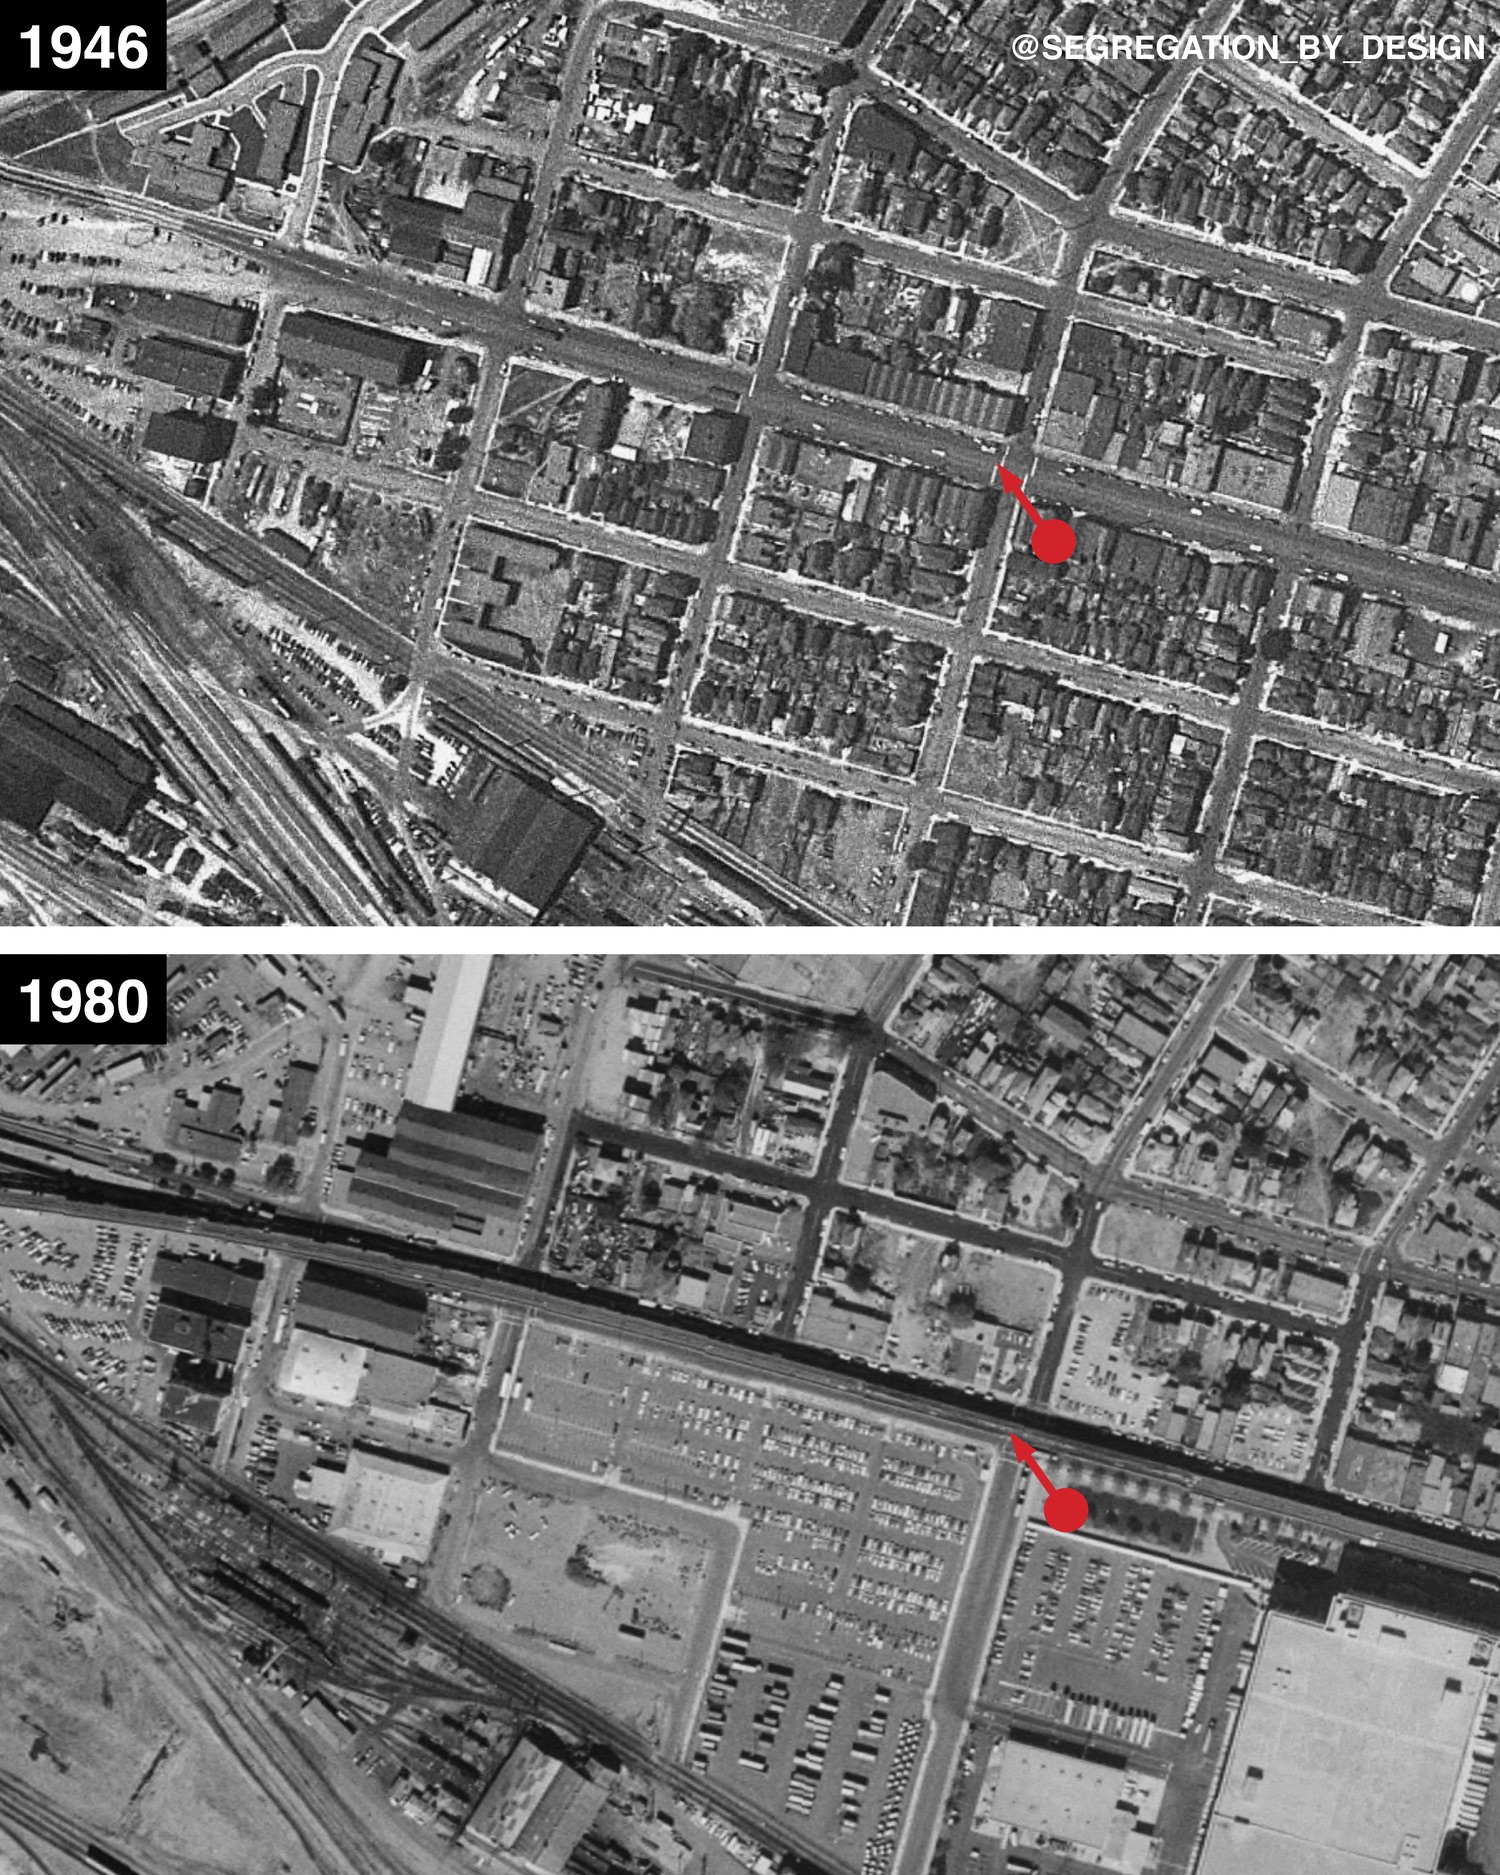 Two aerial images of a city in black and white from above in 1946 and 1980.